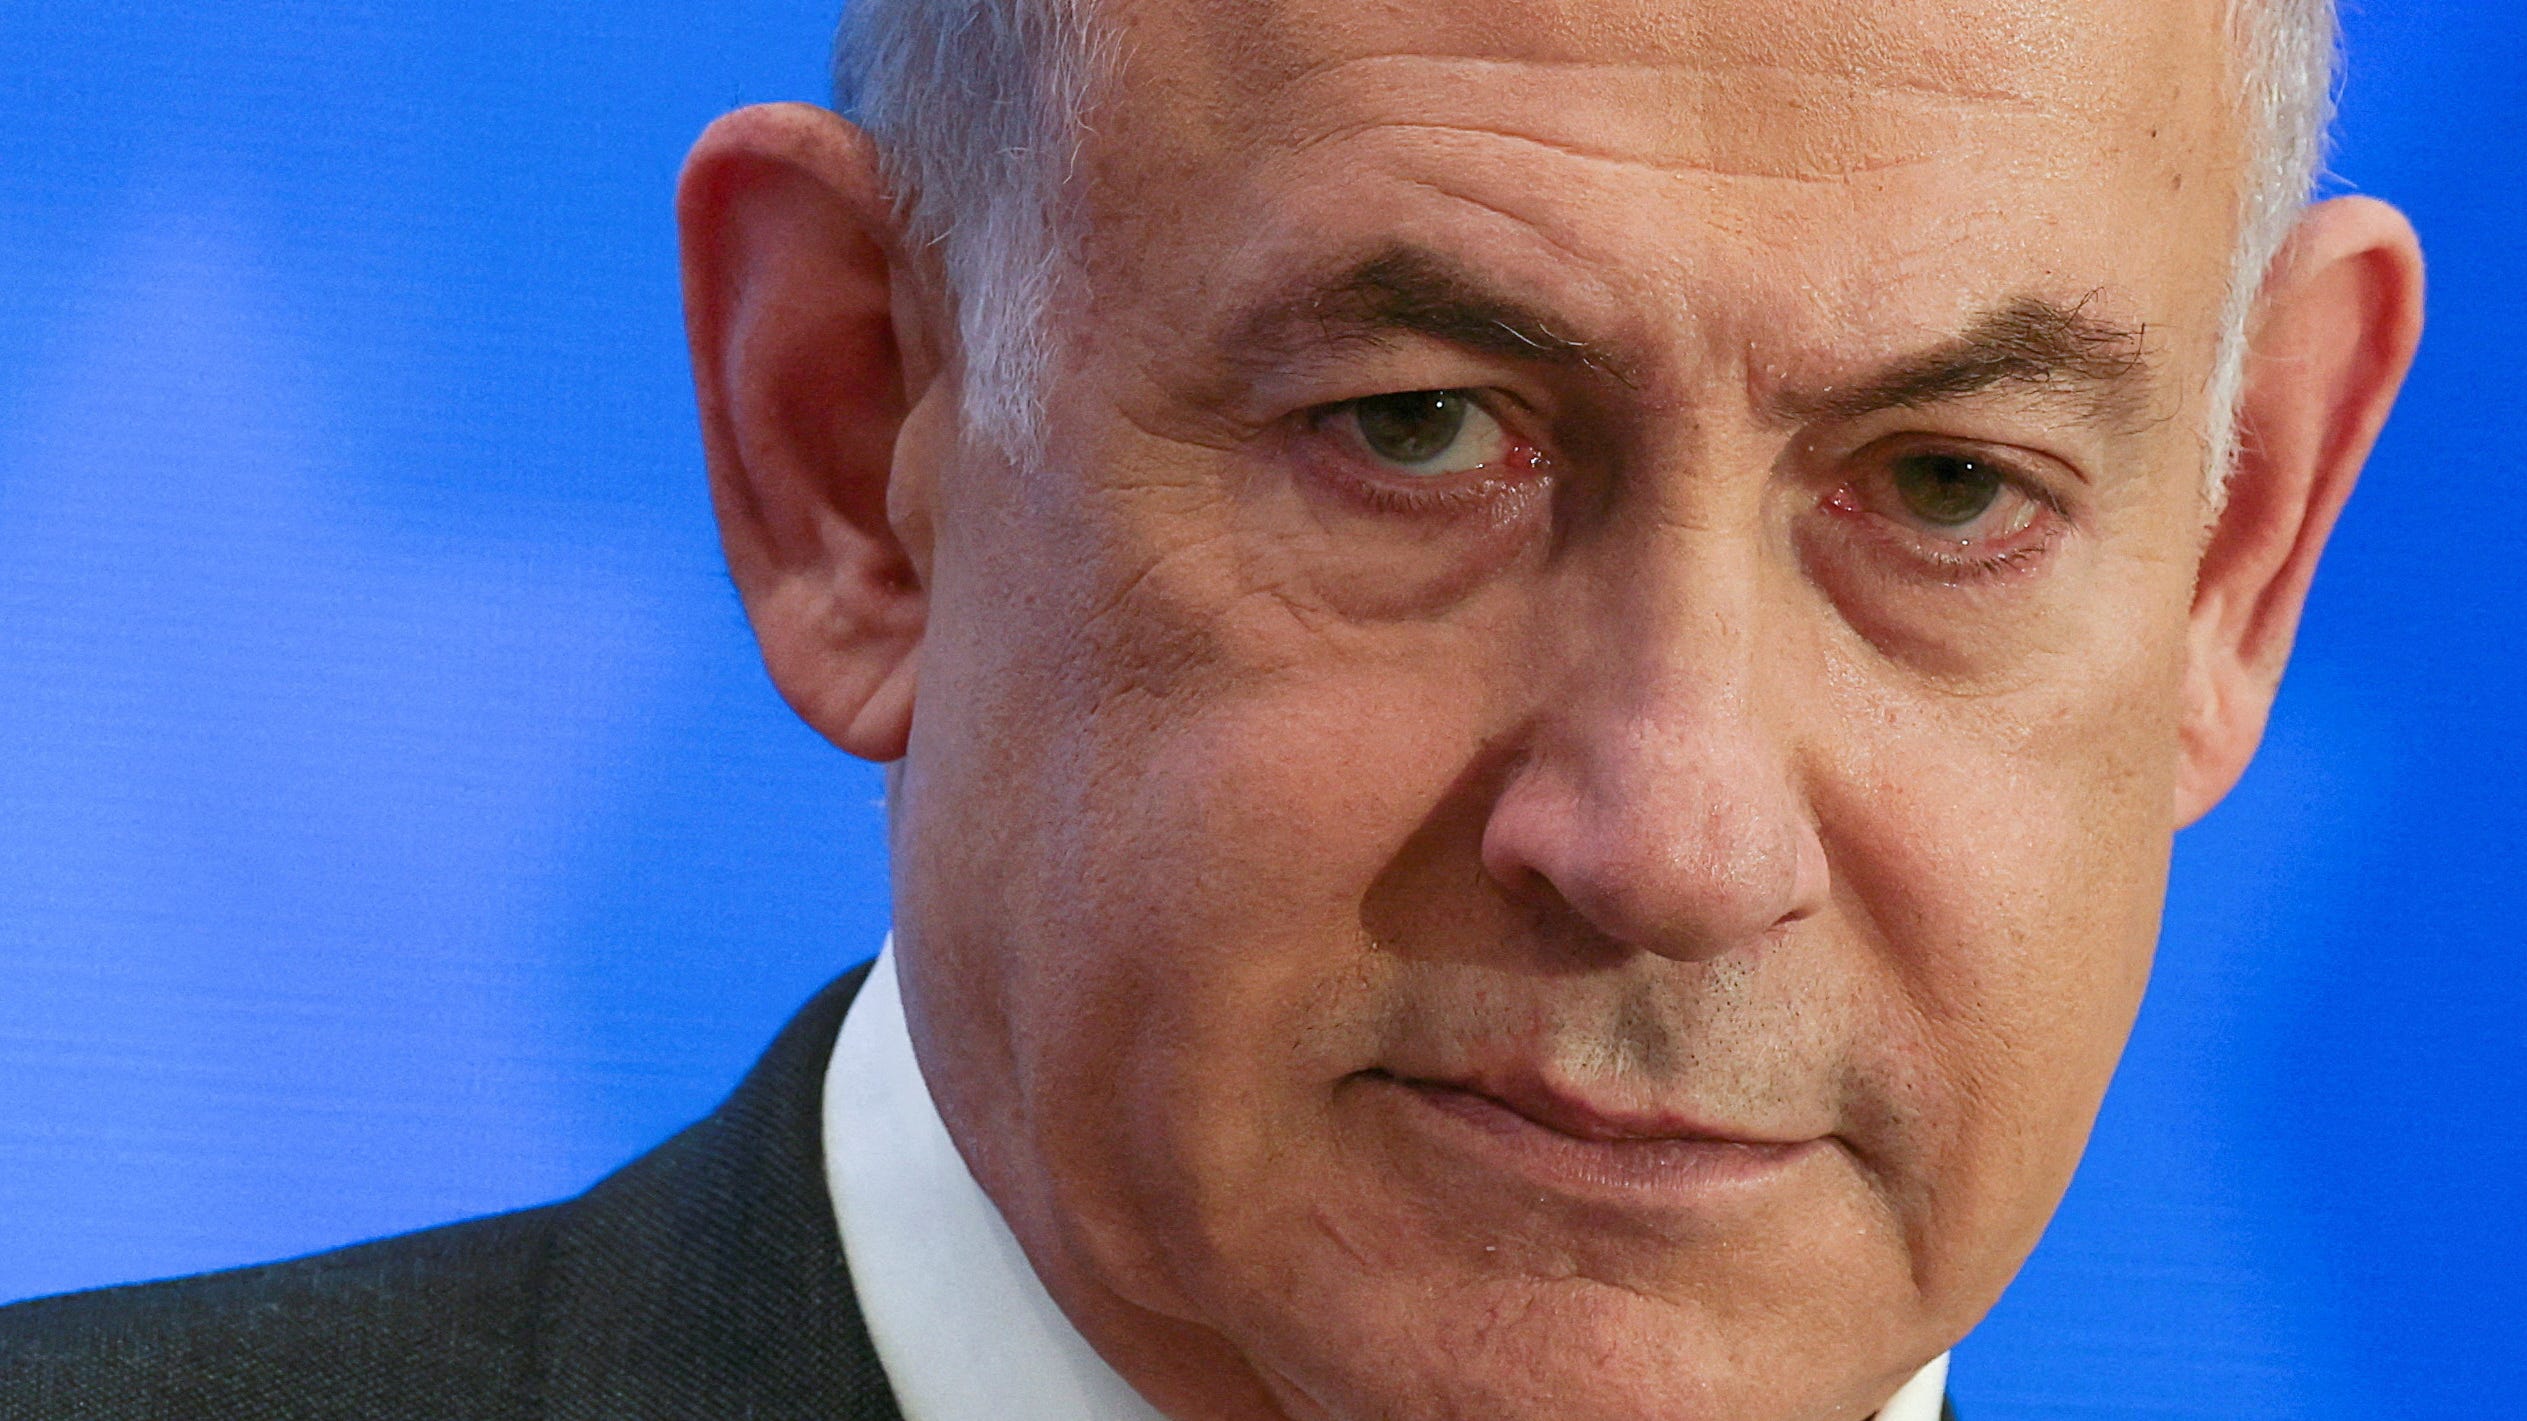 Netanyahu says Israel can 'stand alone' after Biden arms warning